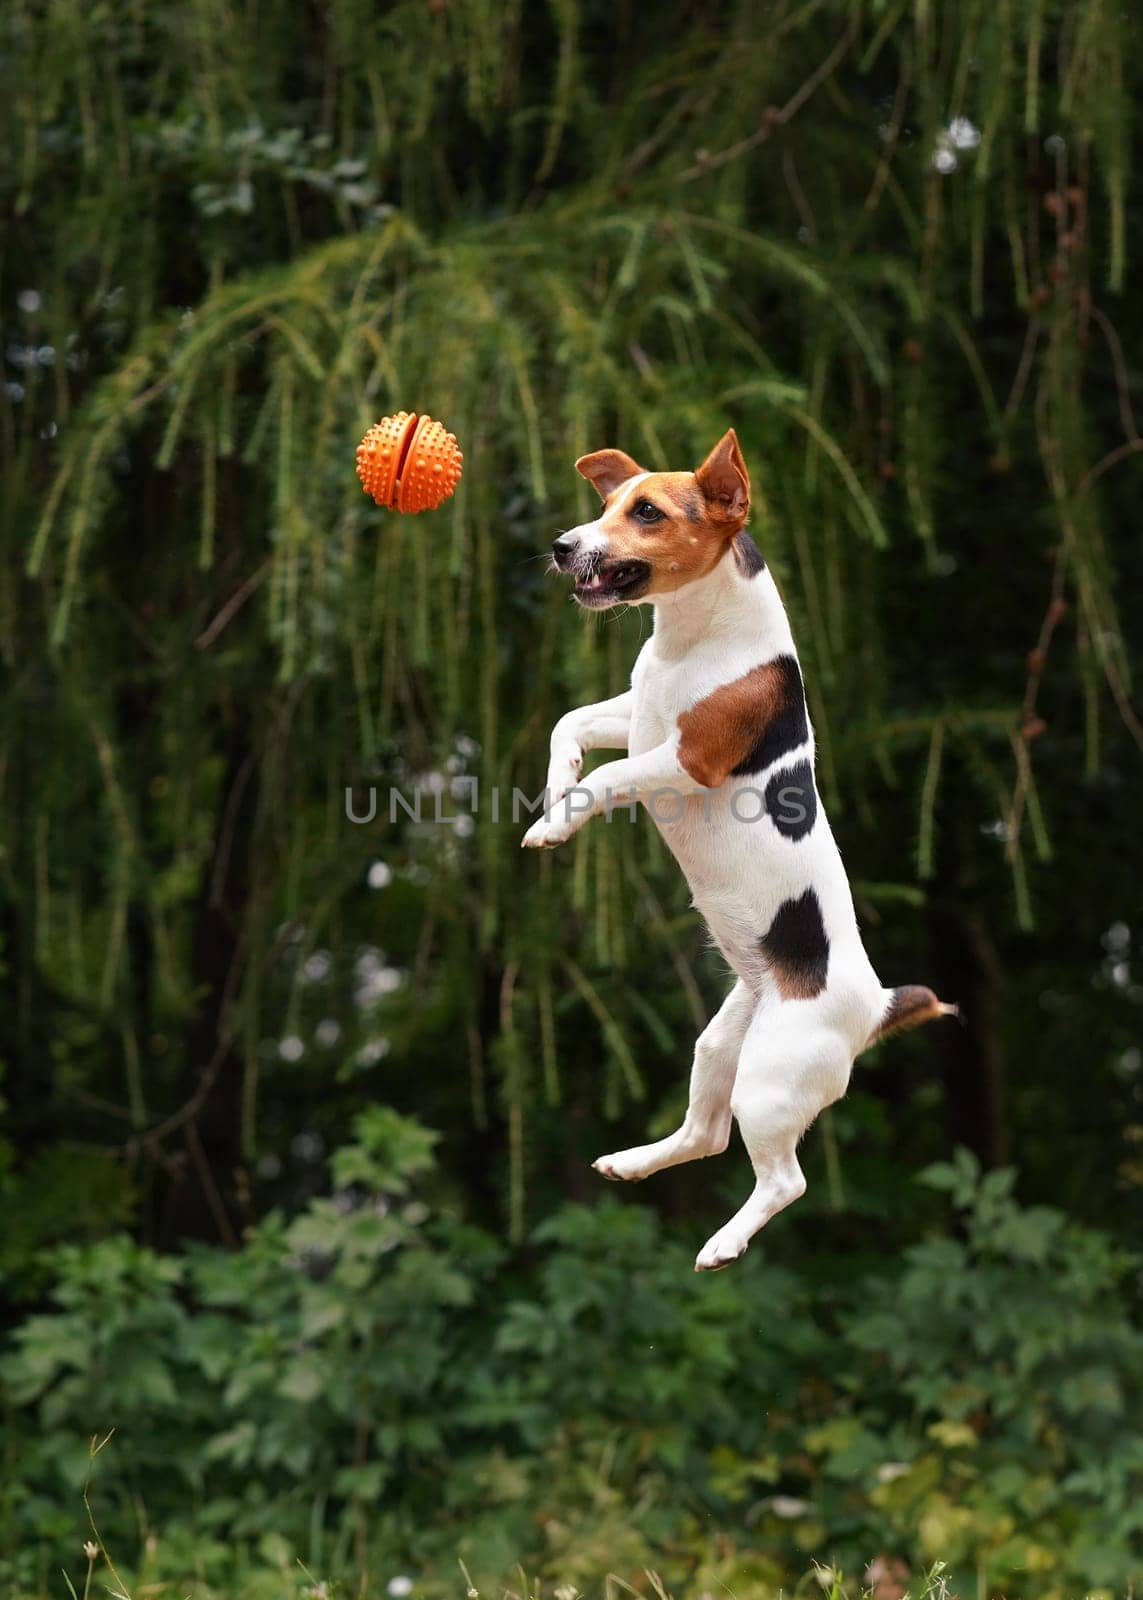 Jack Russell terrier jumping high in the air after orange playing ball, blurred trees background by Ivanko